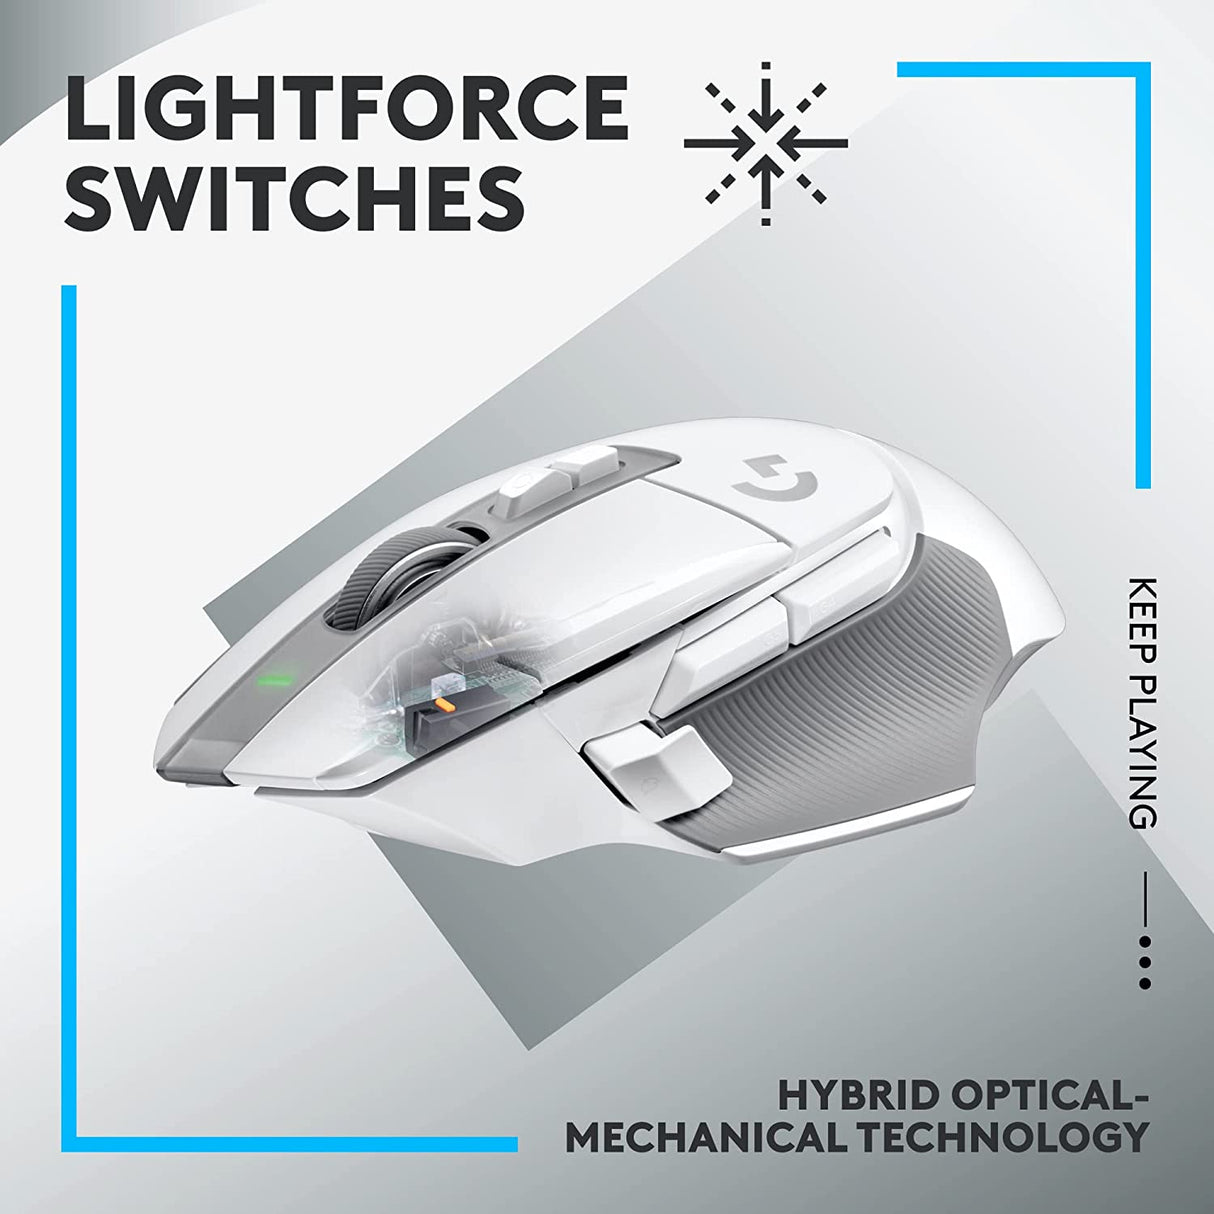 Logitech G502 X LIGHTSPEED Wireless Gaming Mouse - Optical mouse with LIGHTFORCE hybrid optical-mechanical switches, HERO 25K gaming sensor, compatible with PC - macOS/Windows - White White Wireless Non-RGB